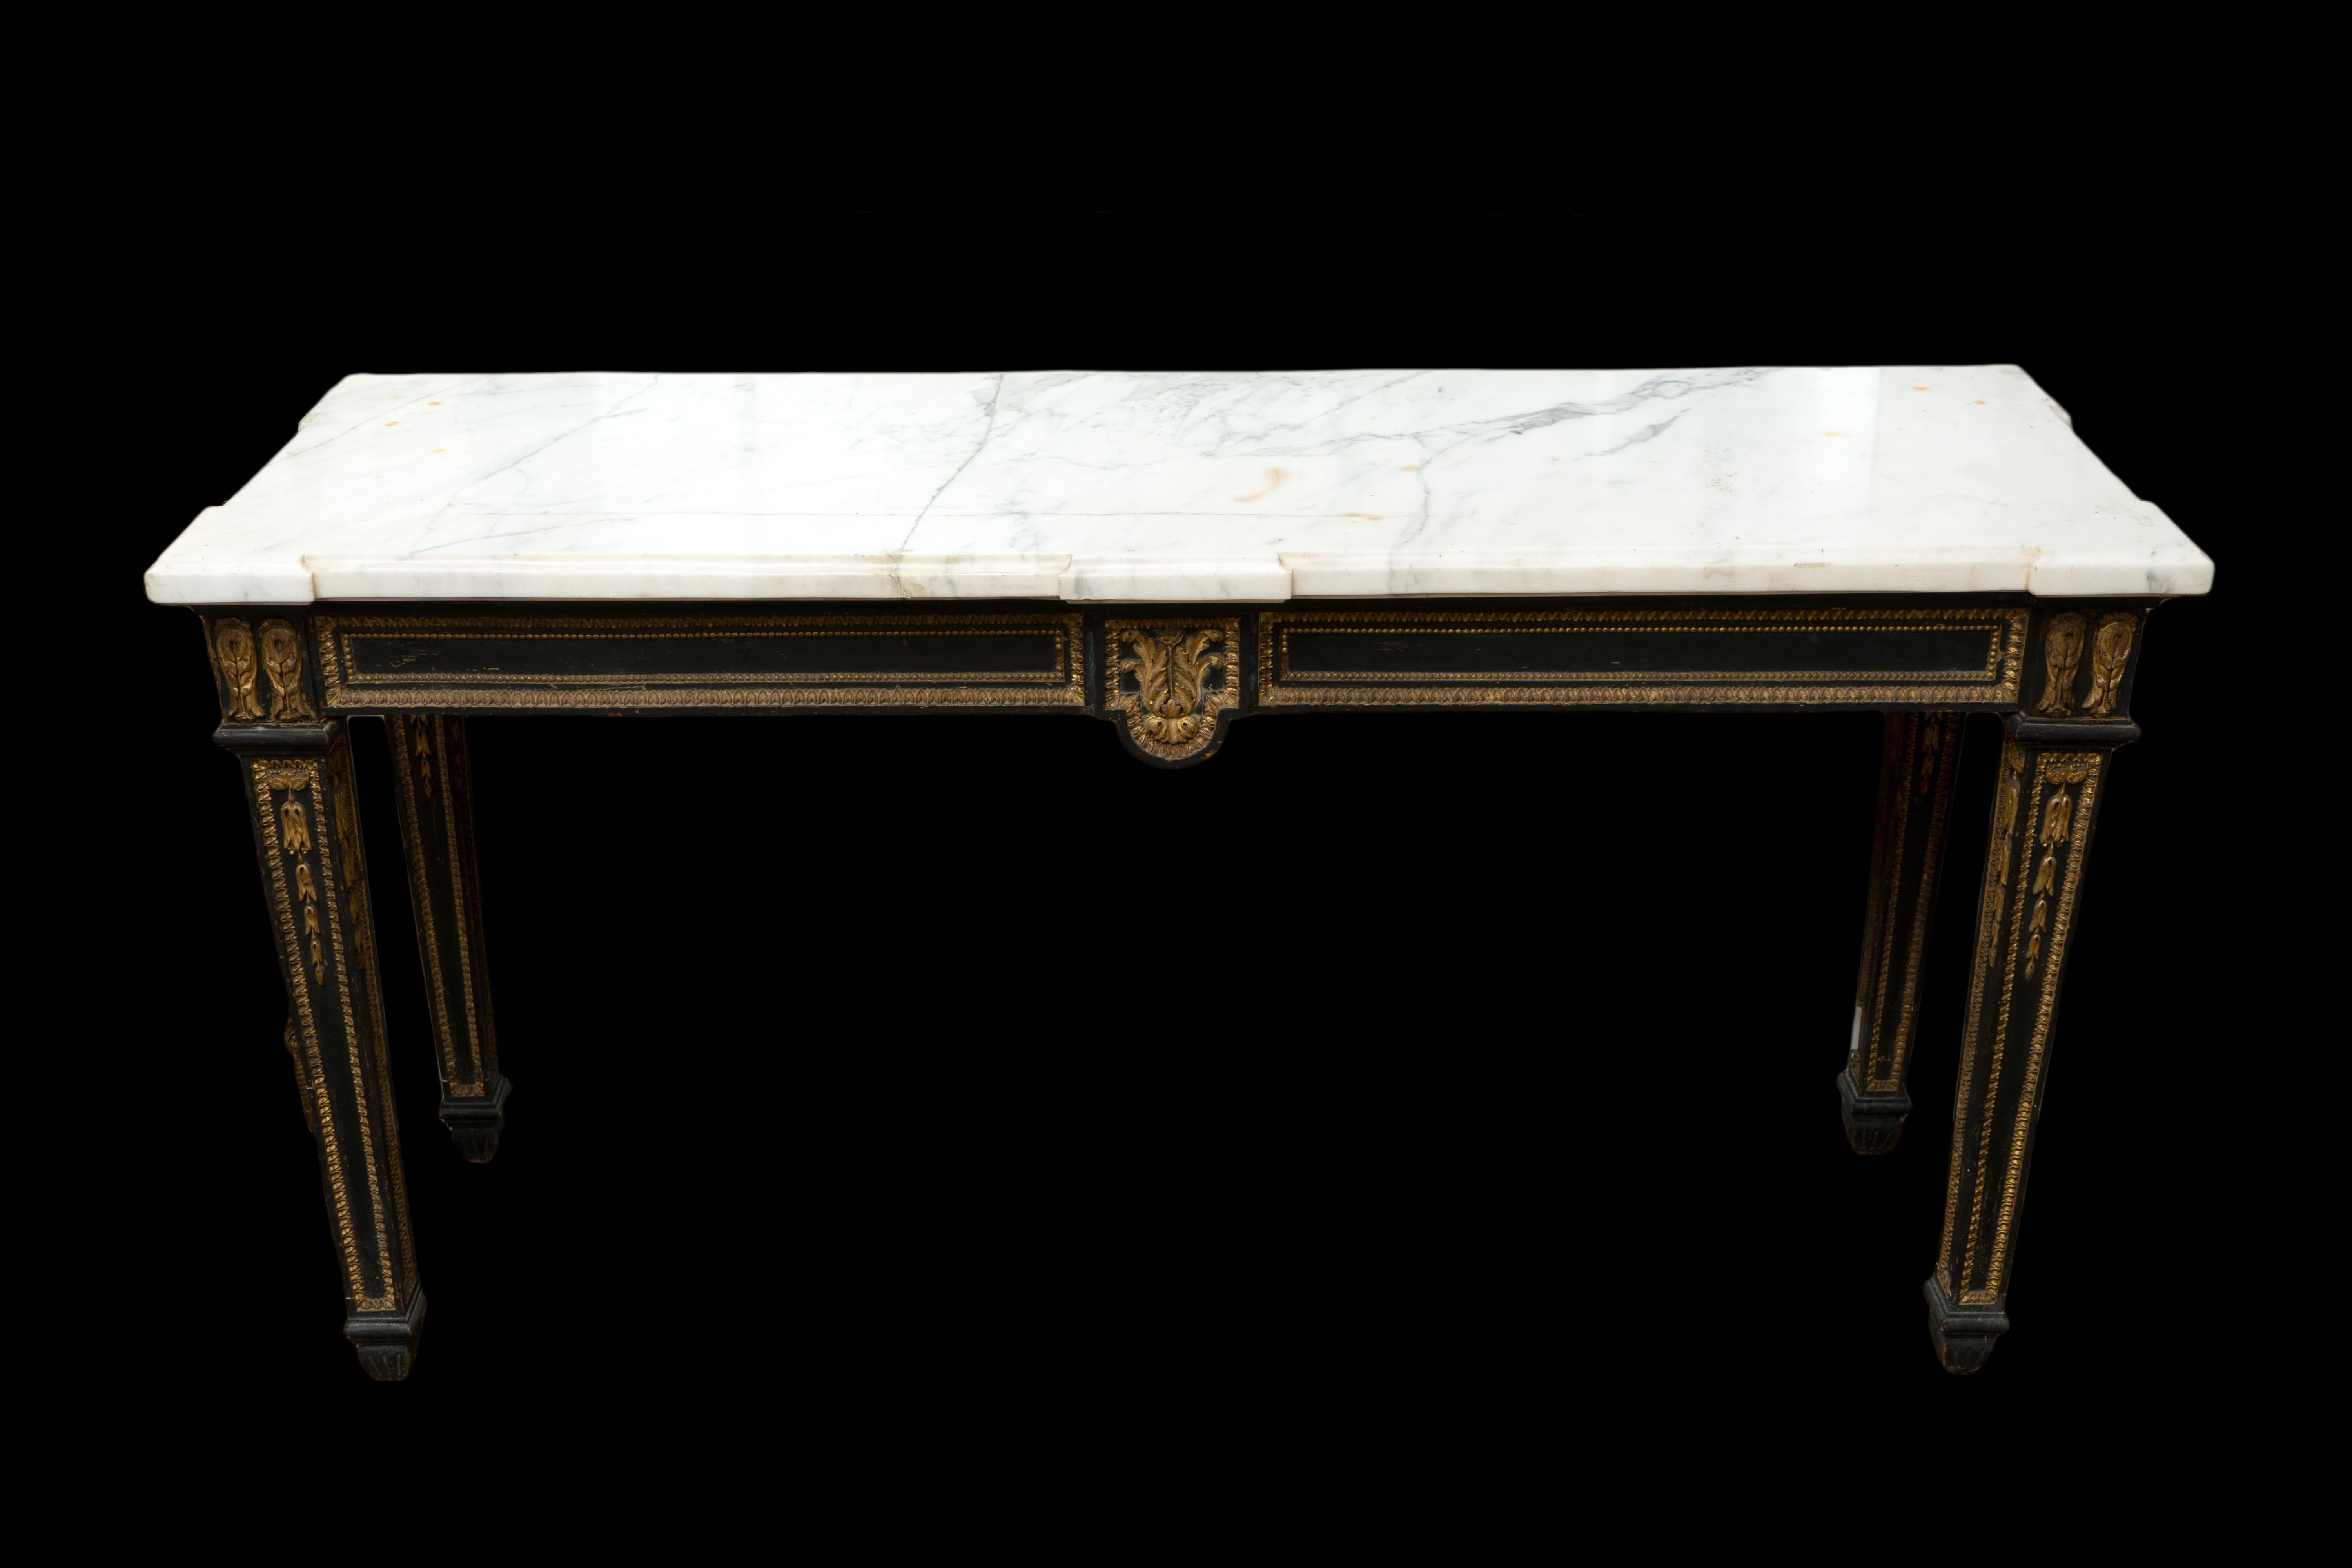 Neoclassical style black and gold console with white marble top from the 19th century.

Measures: 63